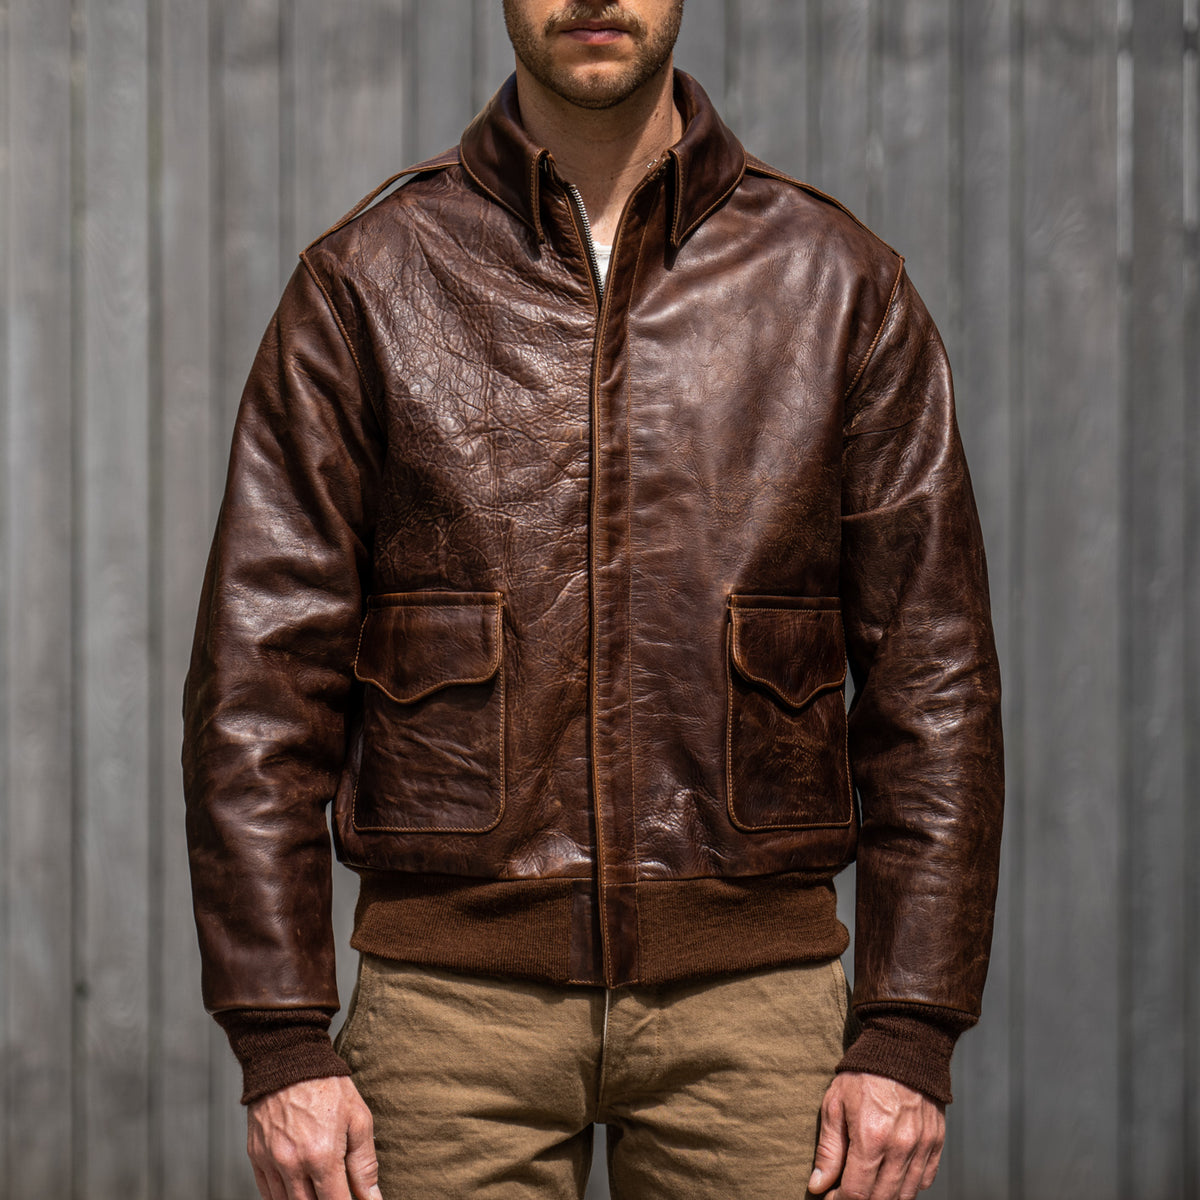 Type A2　EASTMANLEATHER CLOTHINGジャケット/アウター